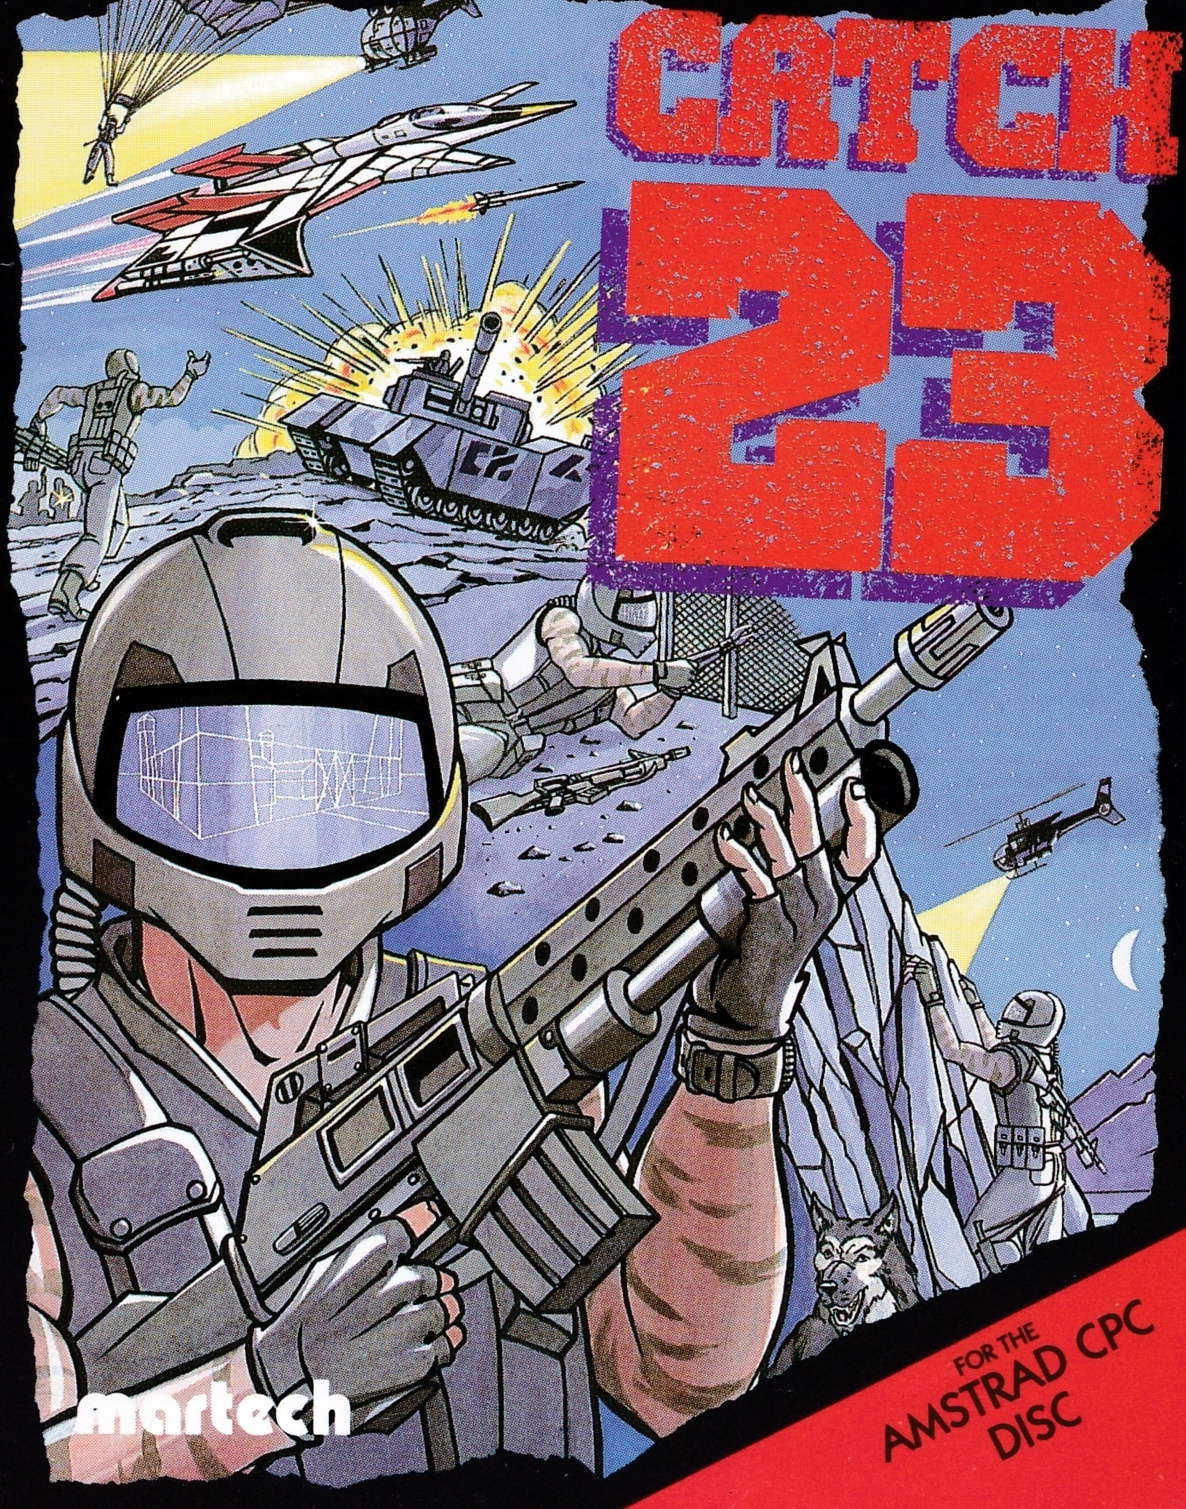 cover of the Amstrad CPC game Catch 23  by GameBase CPC